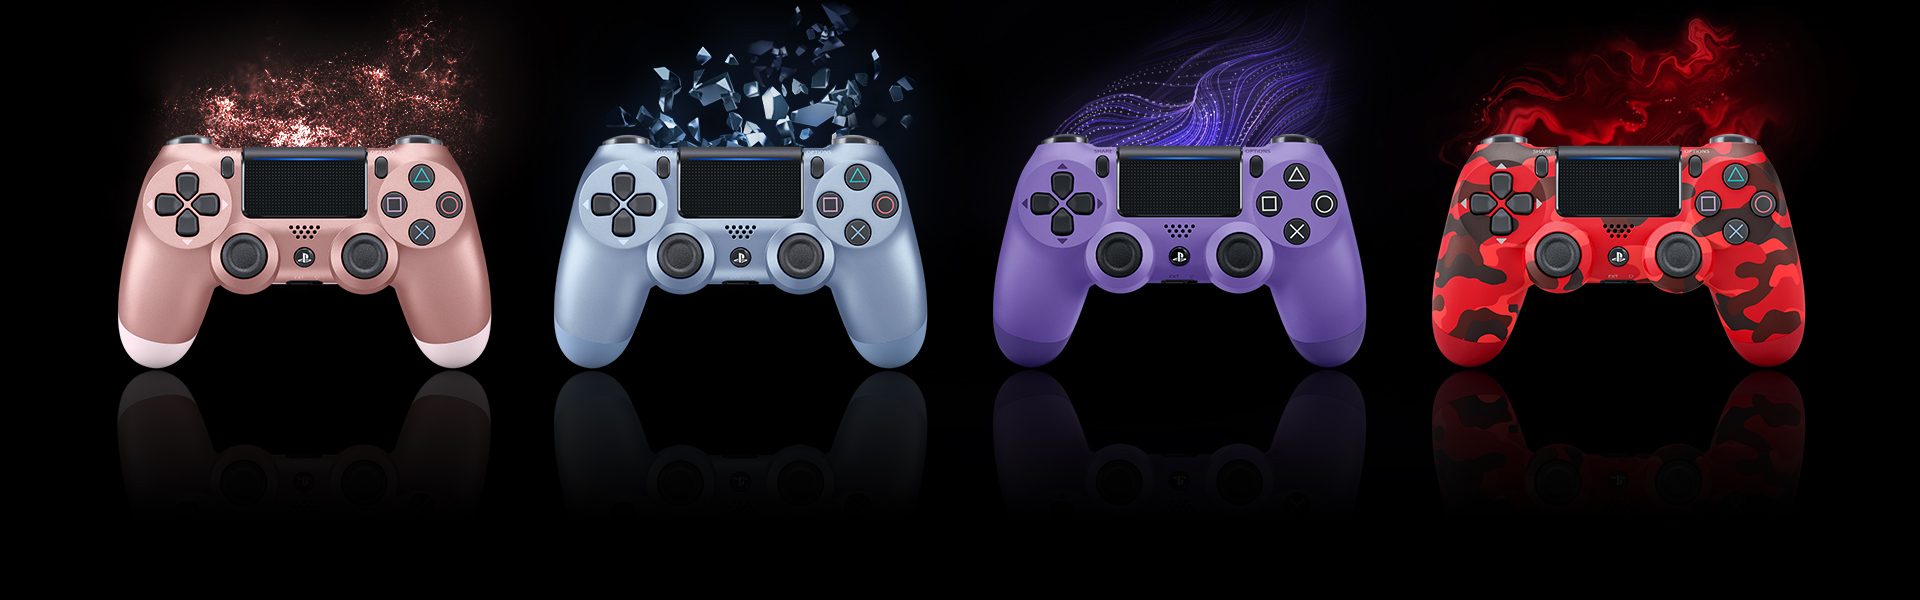 playstation electric purple controller